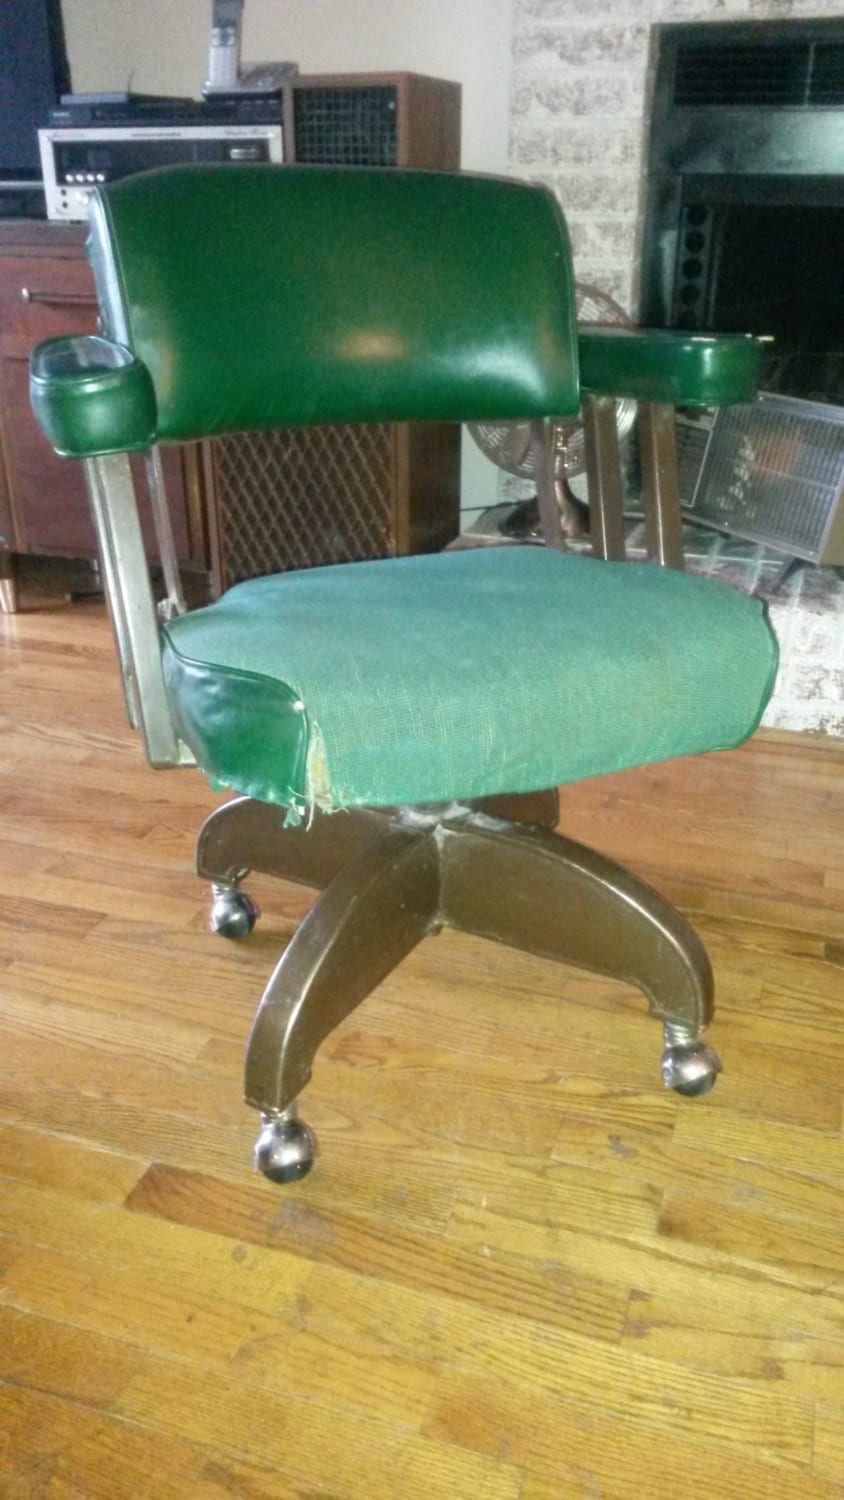 Vintage Domore Office Chair Model 602 Propeller Base On Casters Machine Age Haute Juice